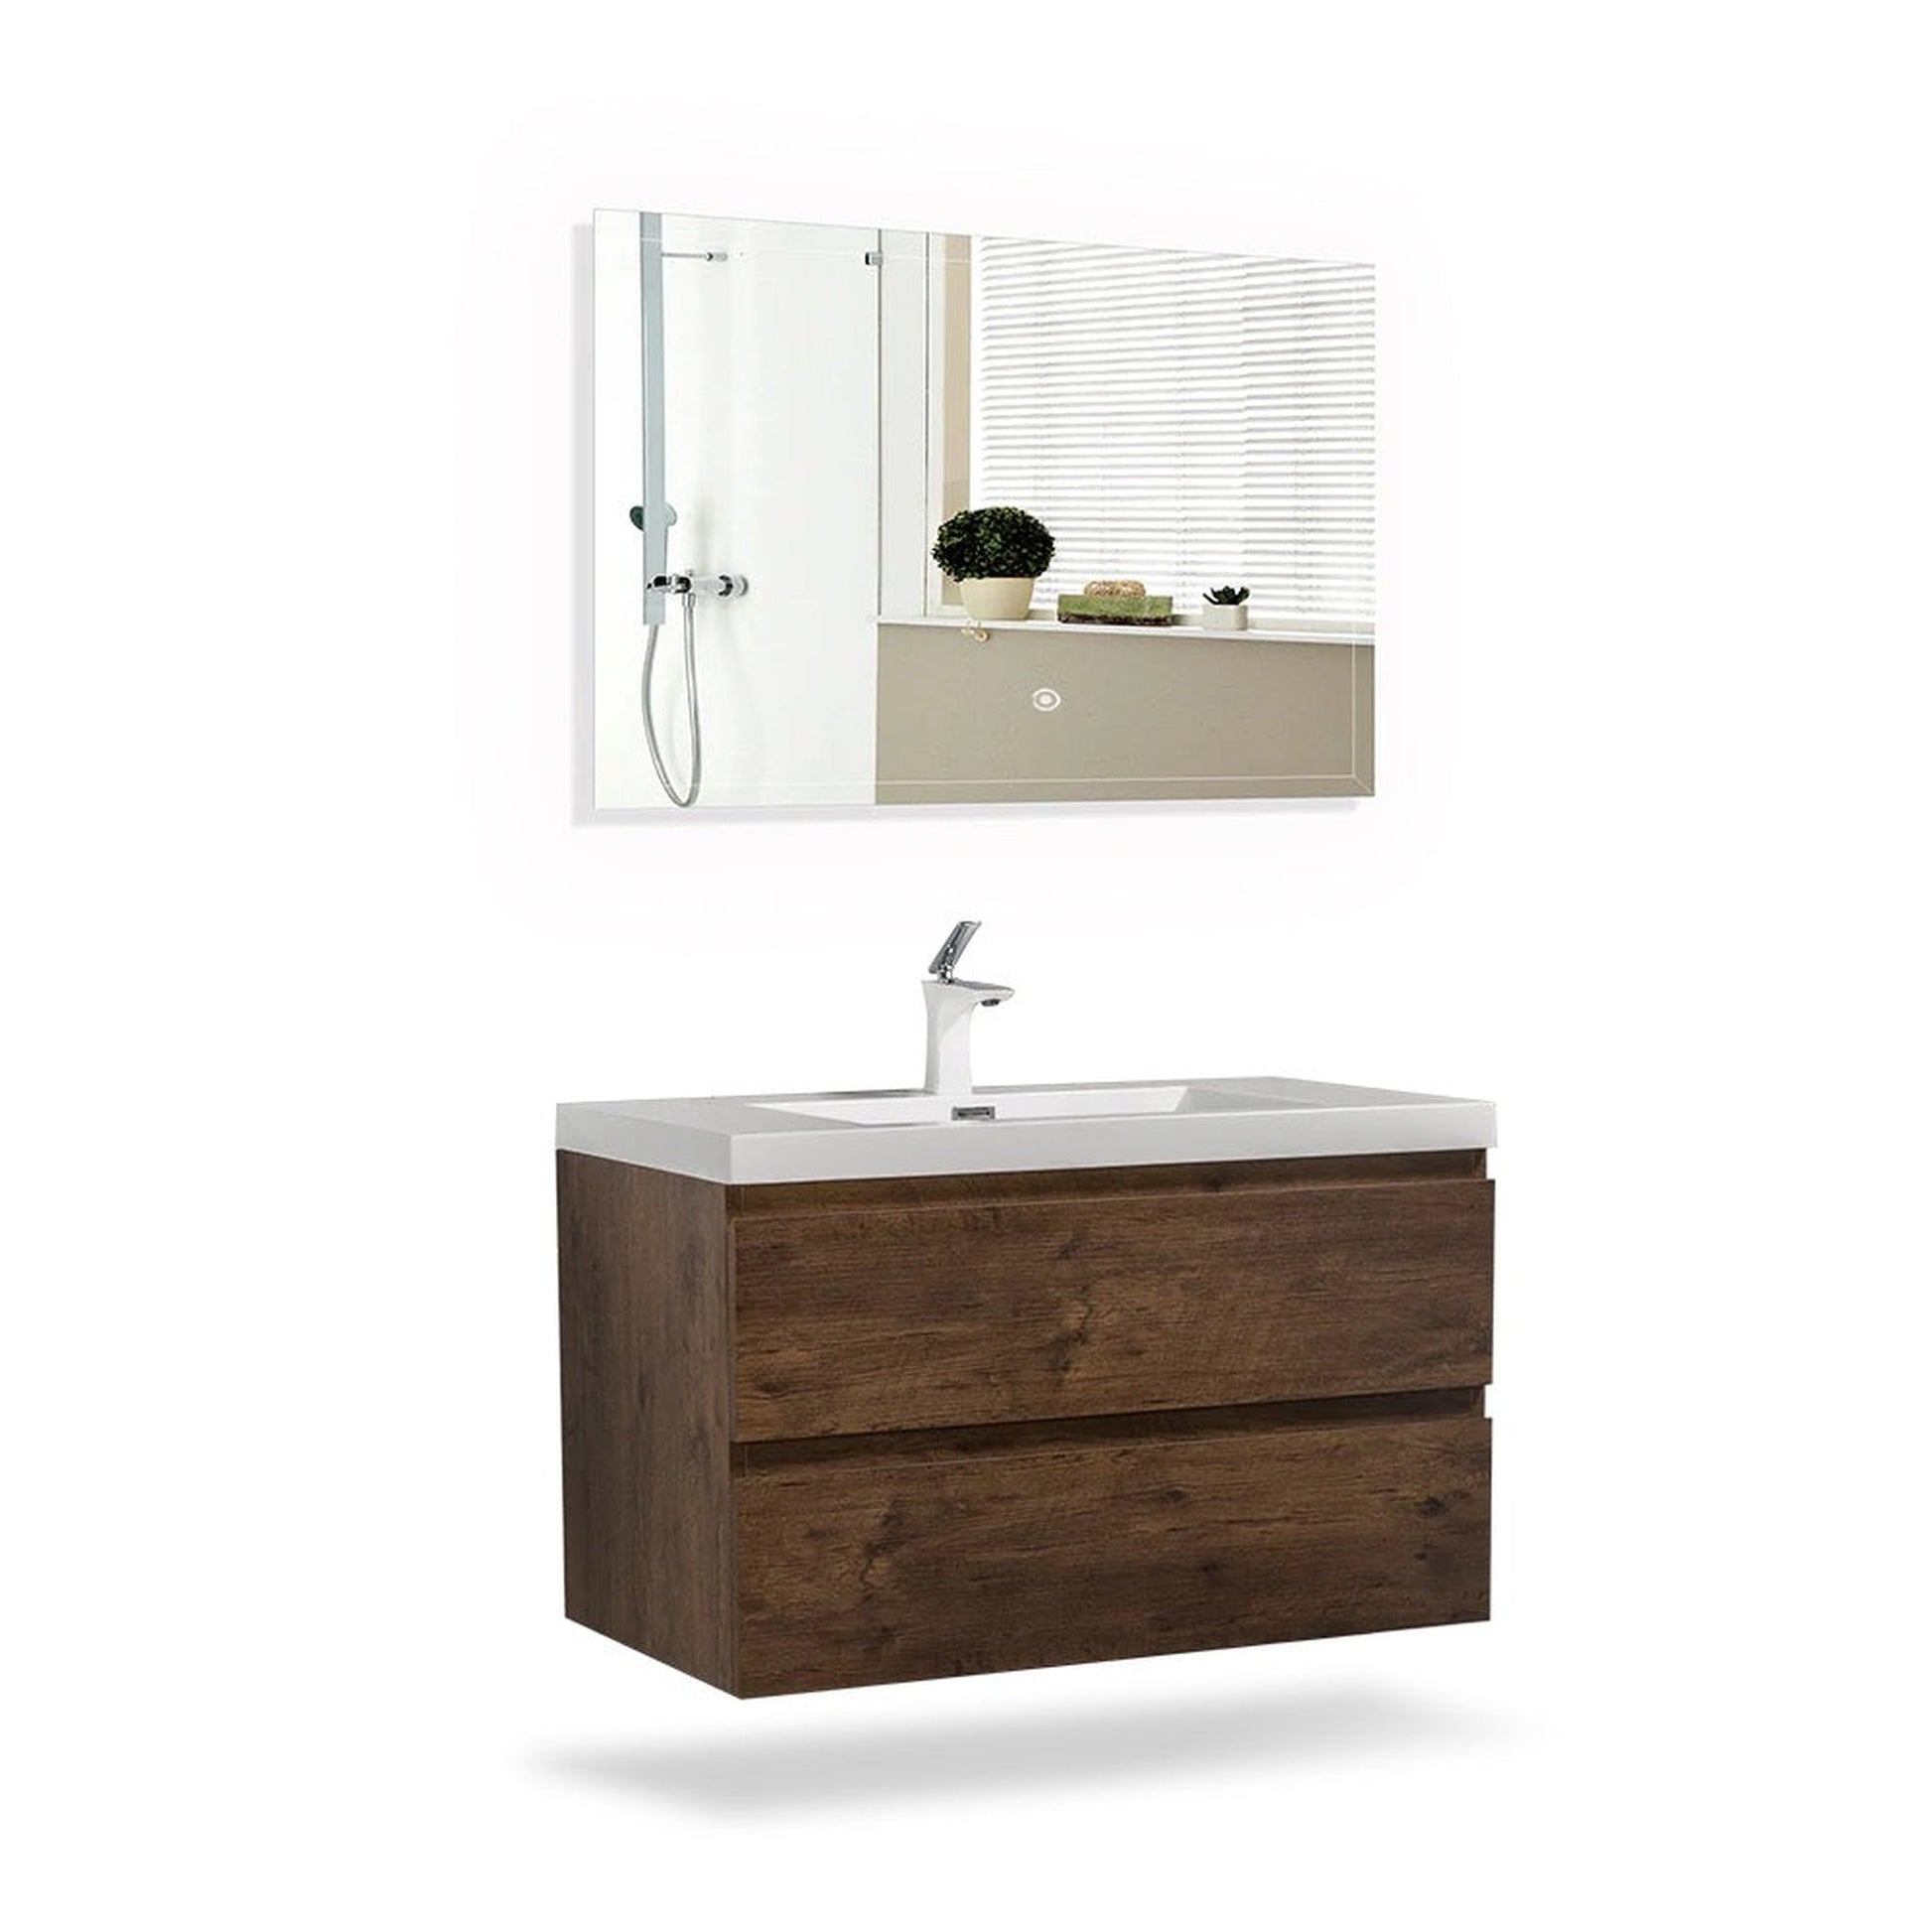 TONA Angela 30" White & Rose Wood Wall-Mounted Bathroom Vanity With Faux Marble Integrated Top & Single Sink